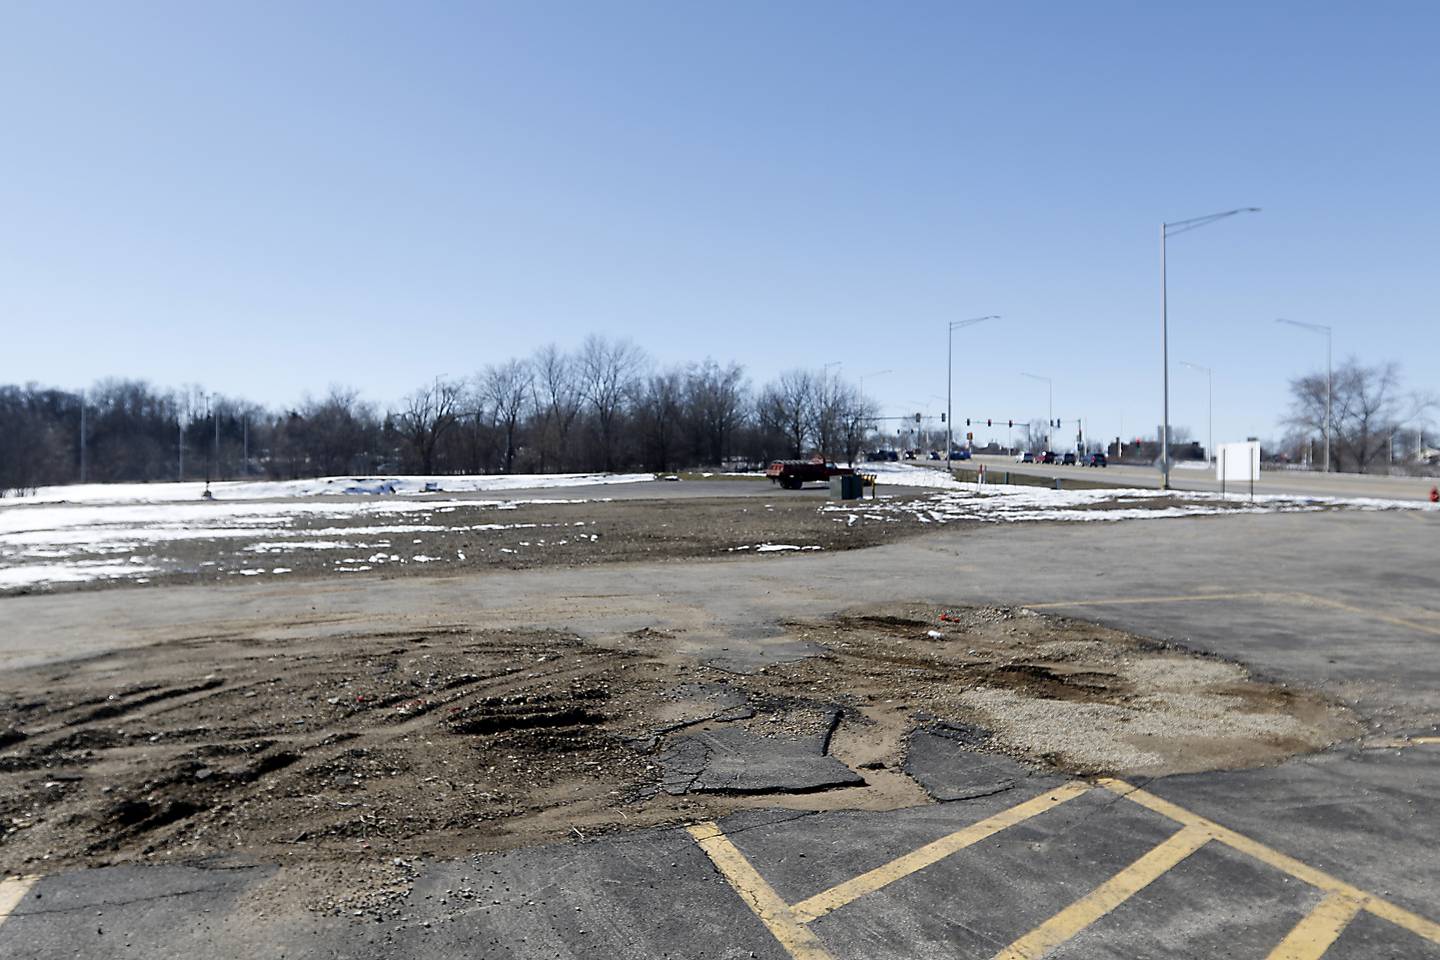 The site of the former D’Andrea Banquet Hall and Conference Center in CrystaL Lake on March 14, 2023. The building was destroyed by fire in April of last year and is still under investigation.